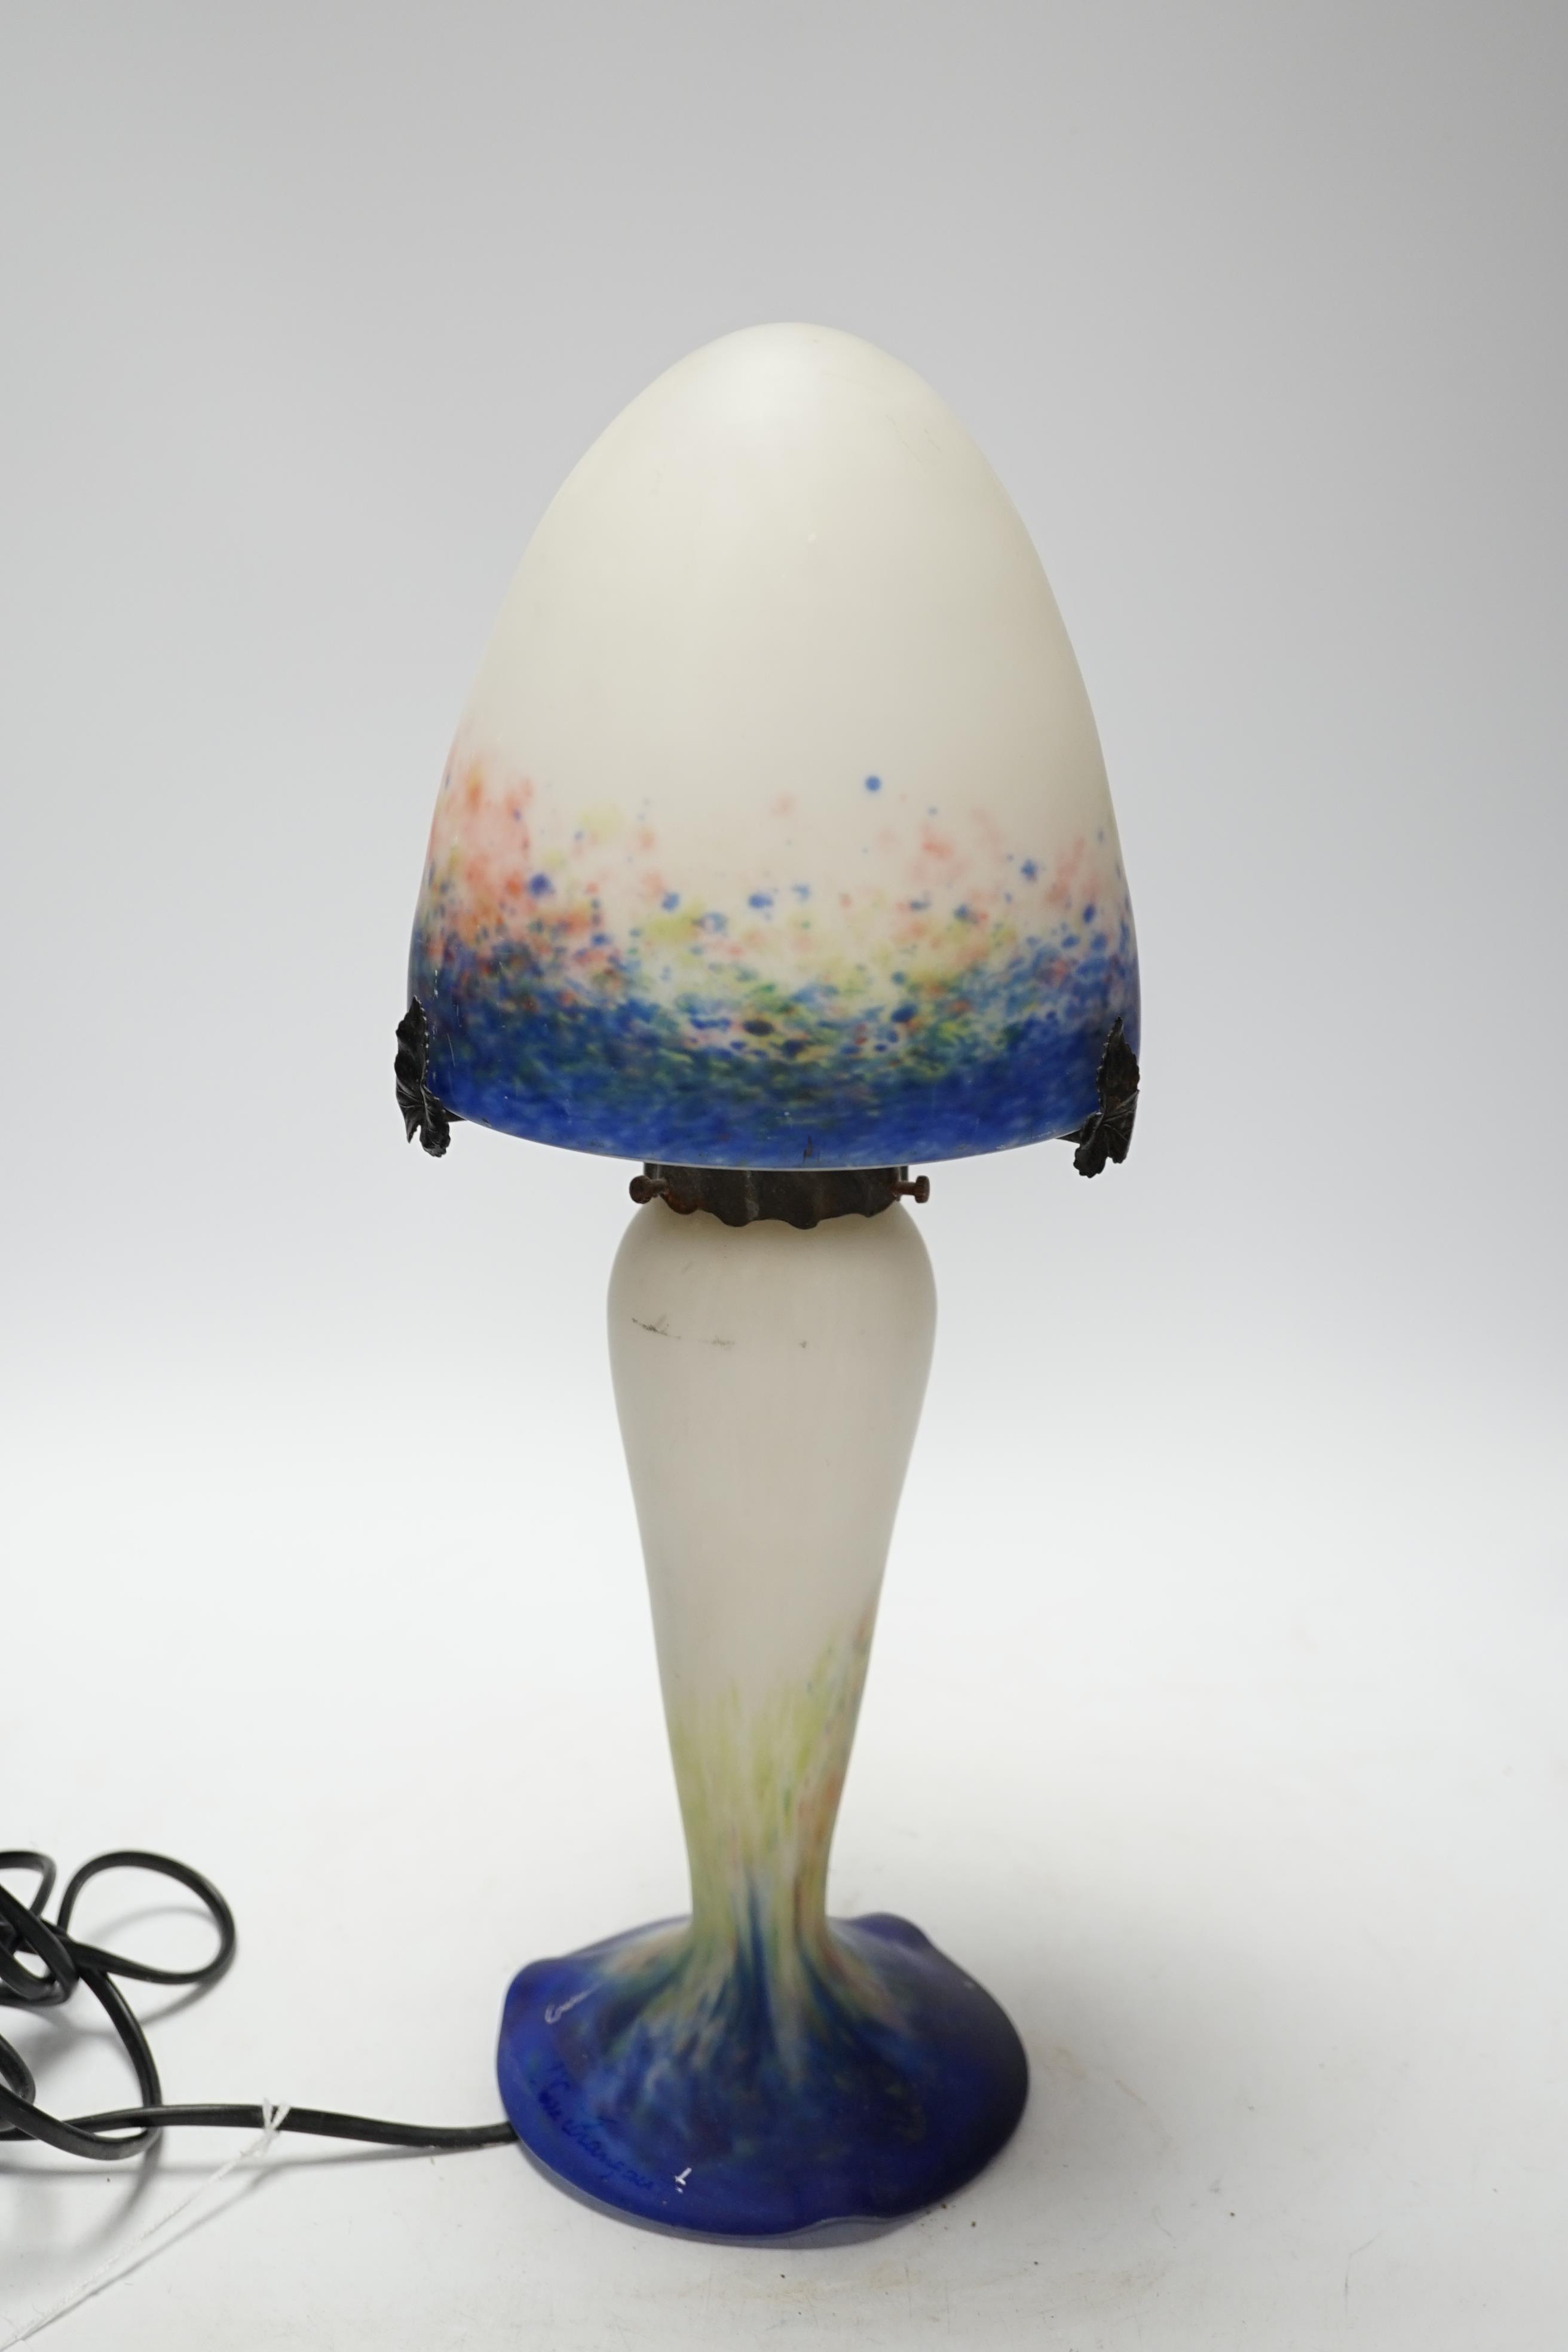 A Le Verre Francais glass mushroom table lamp, signed to the base, 39cm high